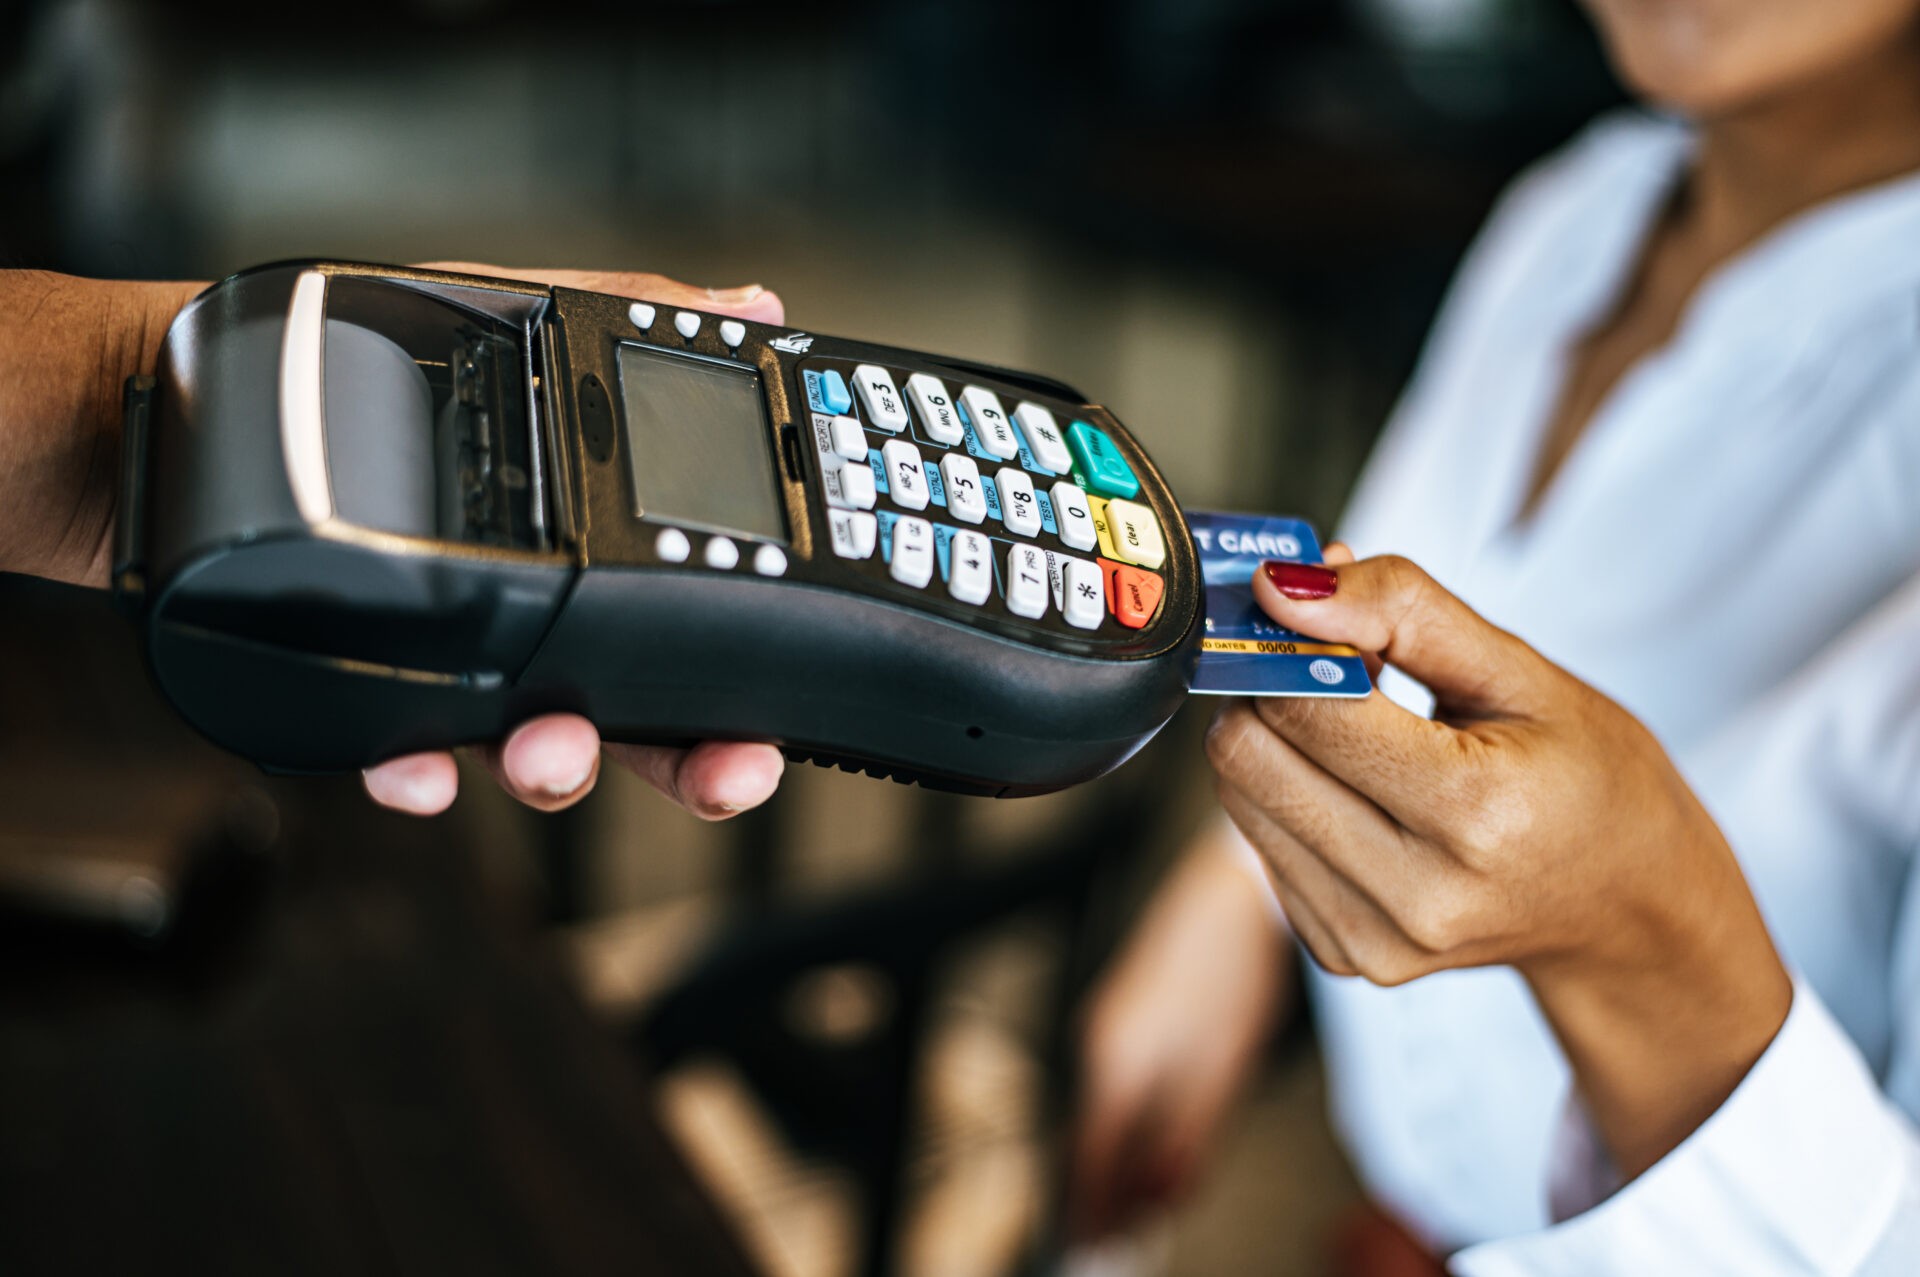 A woman pays with a credit card at a POS terminal. EMV level 3 certification is required for terminals to take smart card payments. We show how we do L3 certification faster.